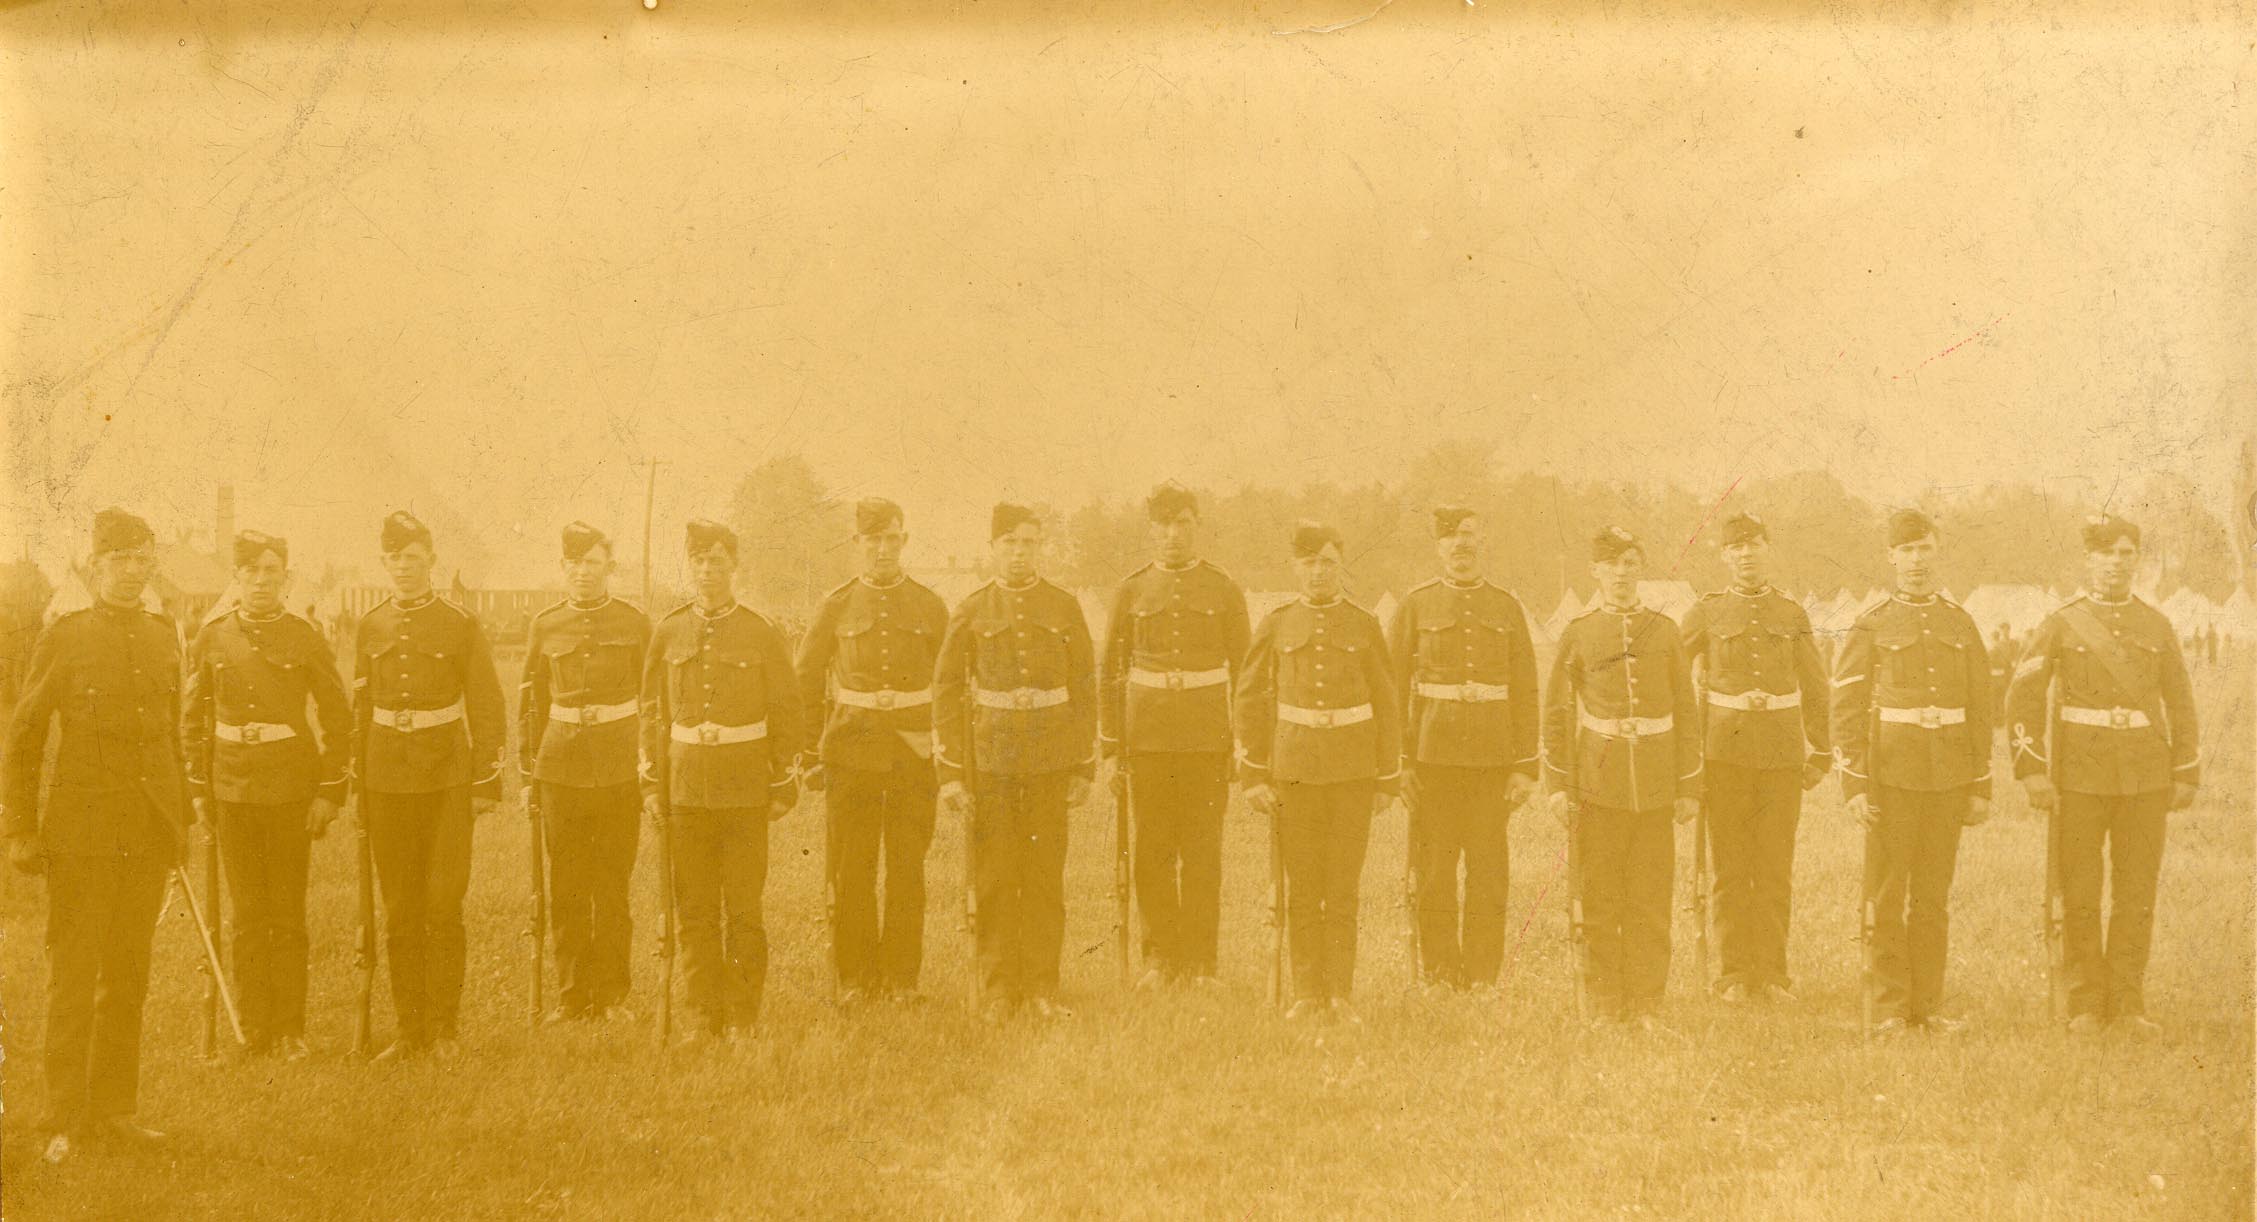 Very%20faded%2C%20yellowed%20black%20and%20white%20photograph%20of%20some%20of%20the%2021st%20Regiment%20of%20the%20Essex%20Fusiliers